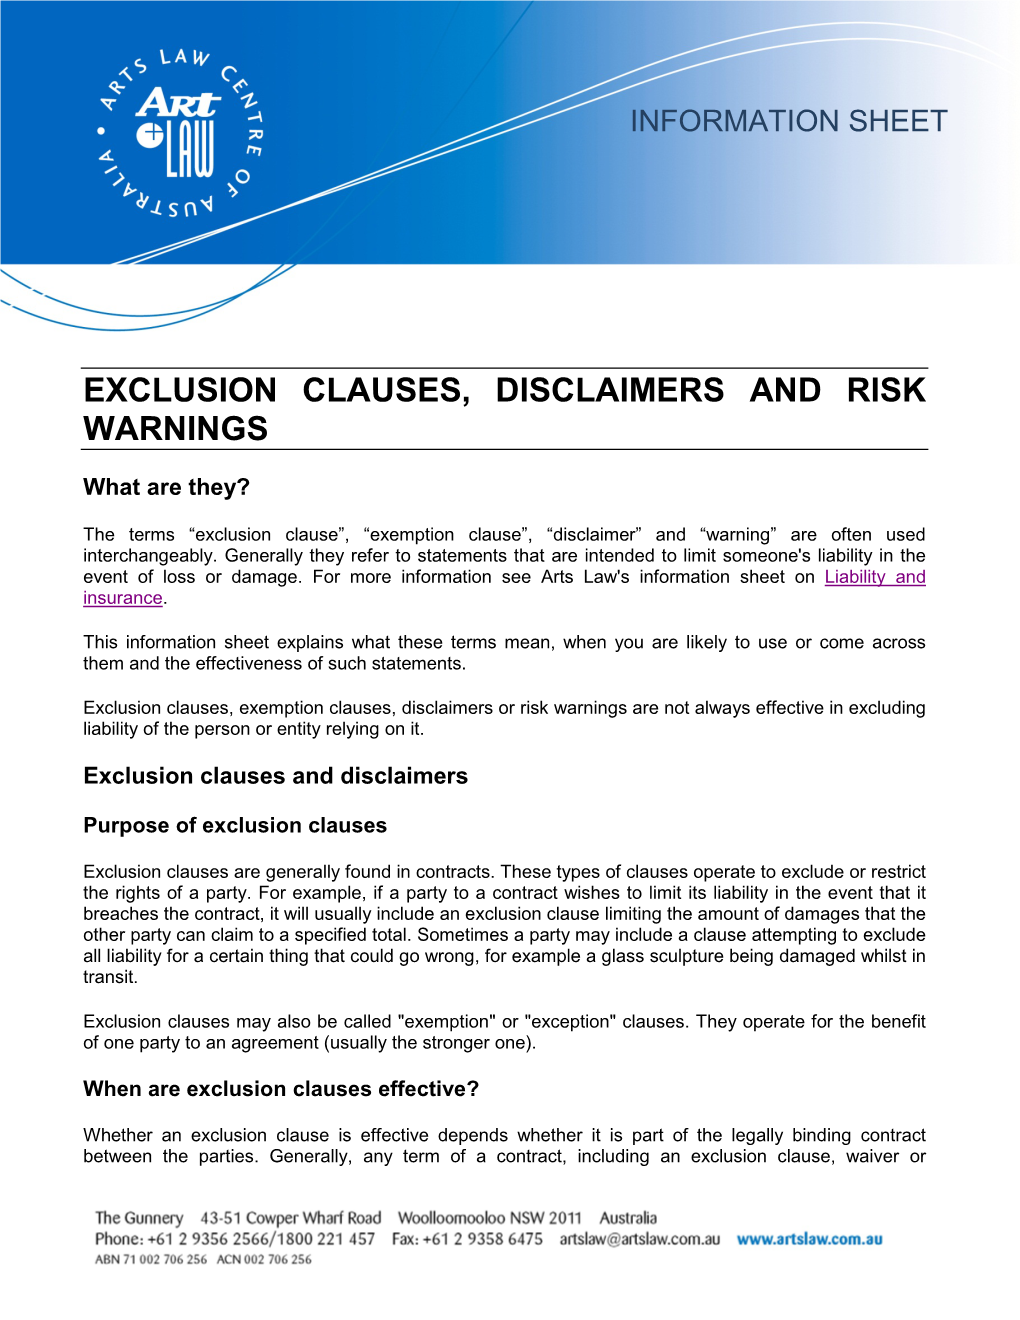 Exclusion Clauses, Disclaimers and Risk Warnings